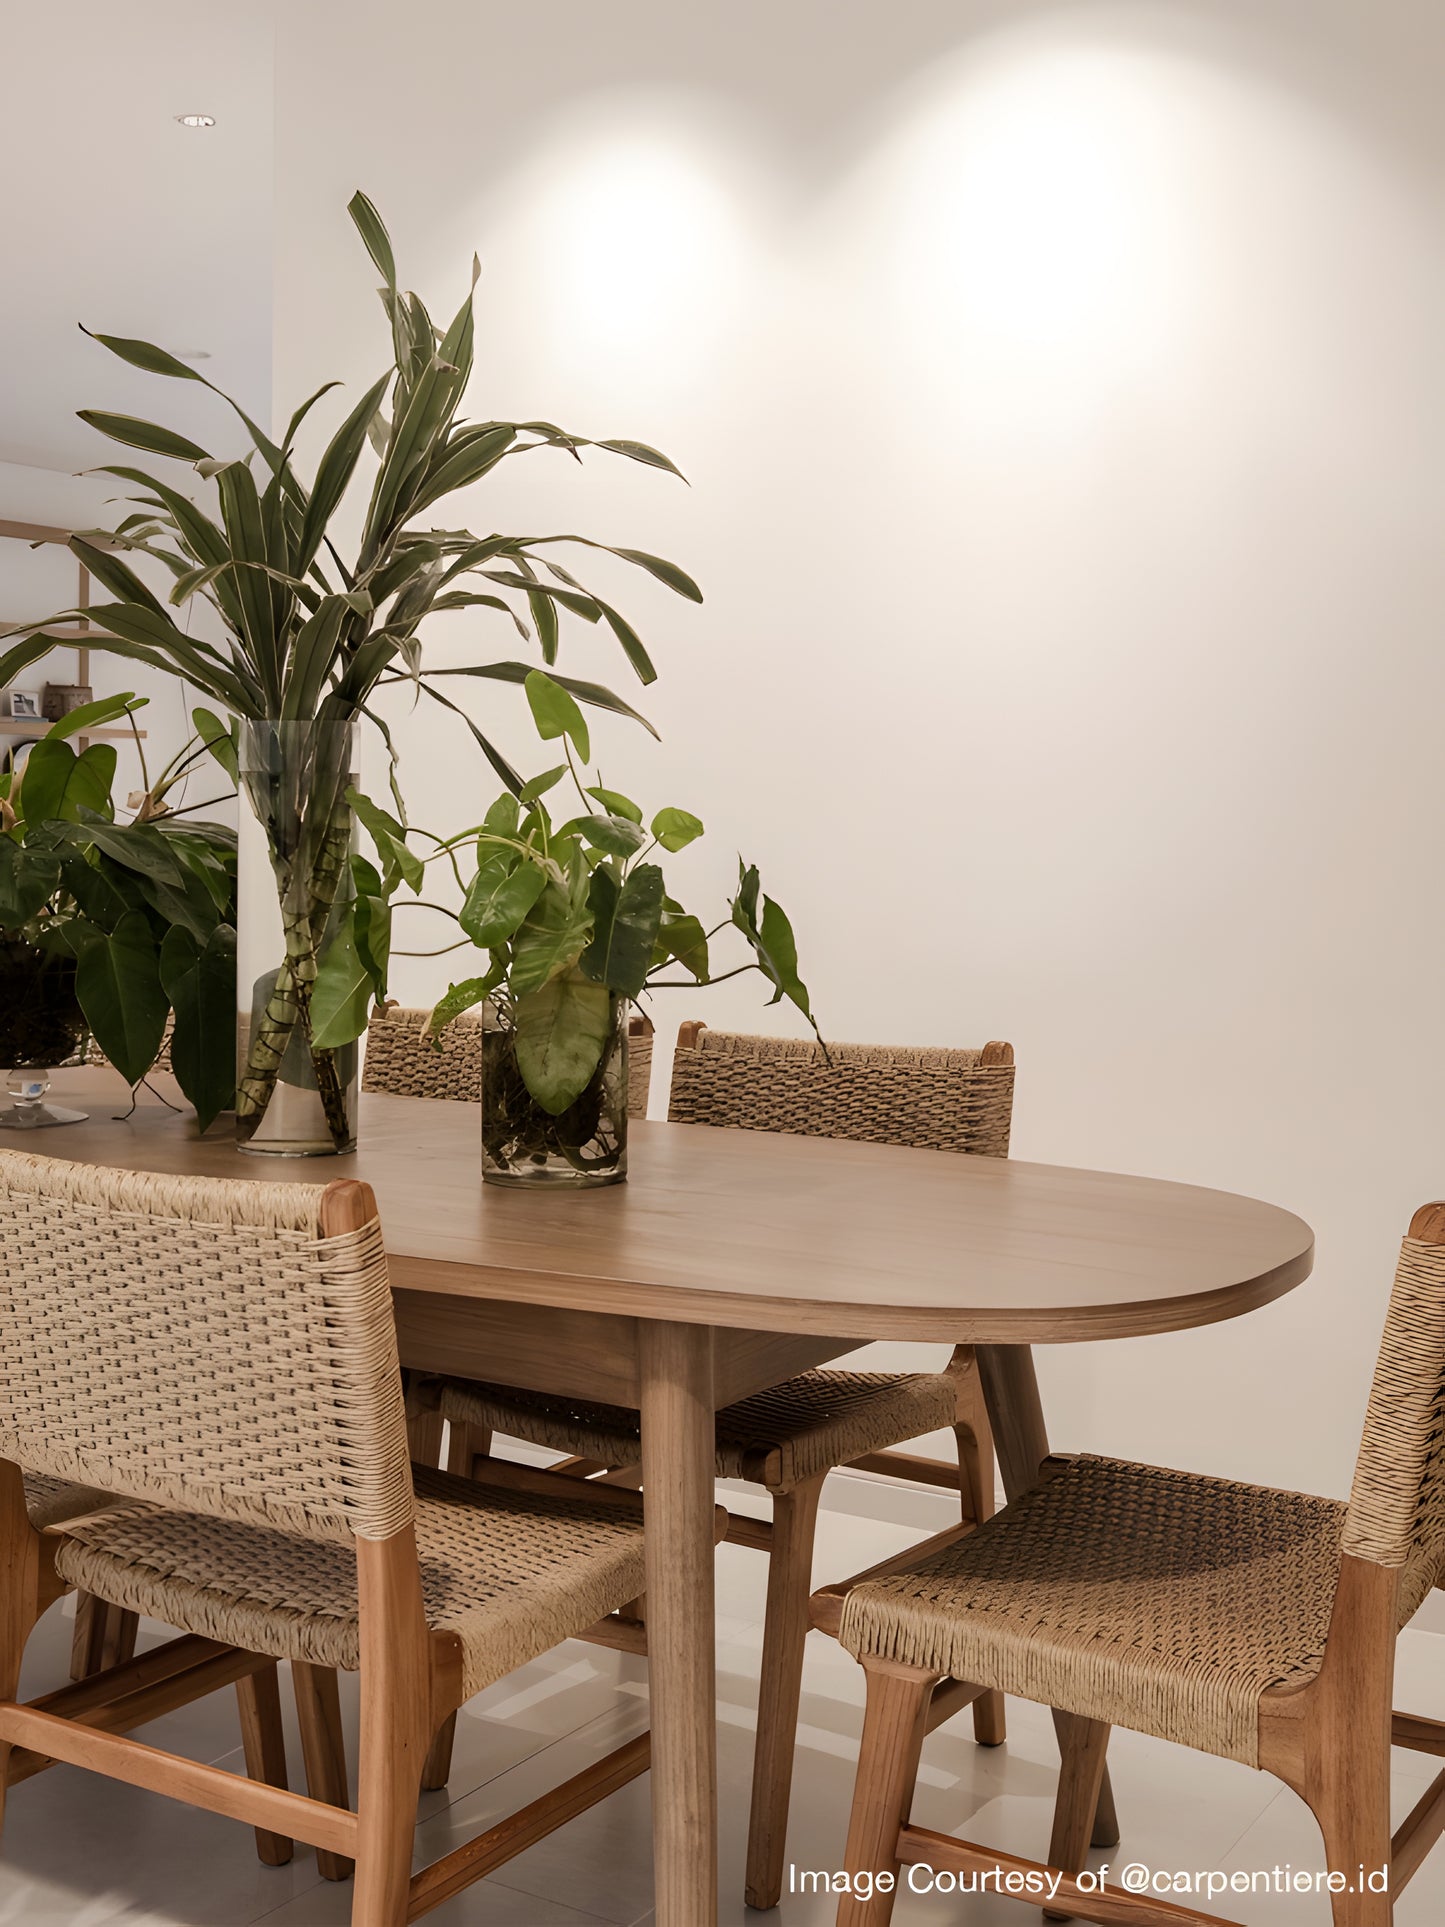 4 Asturia Mindi Wood & Rattan Weaved Back & Seat Dining Chairs in dining room setting by Mellowdays Furniture